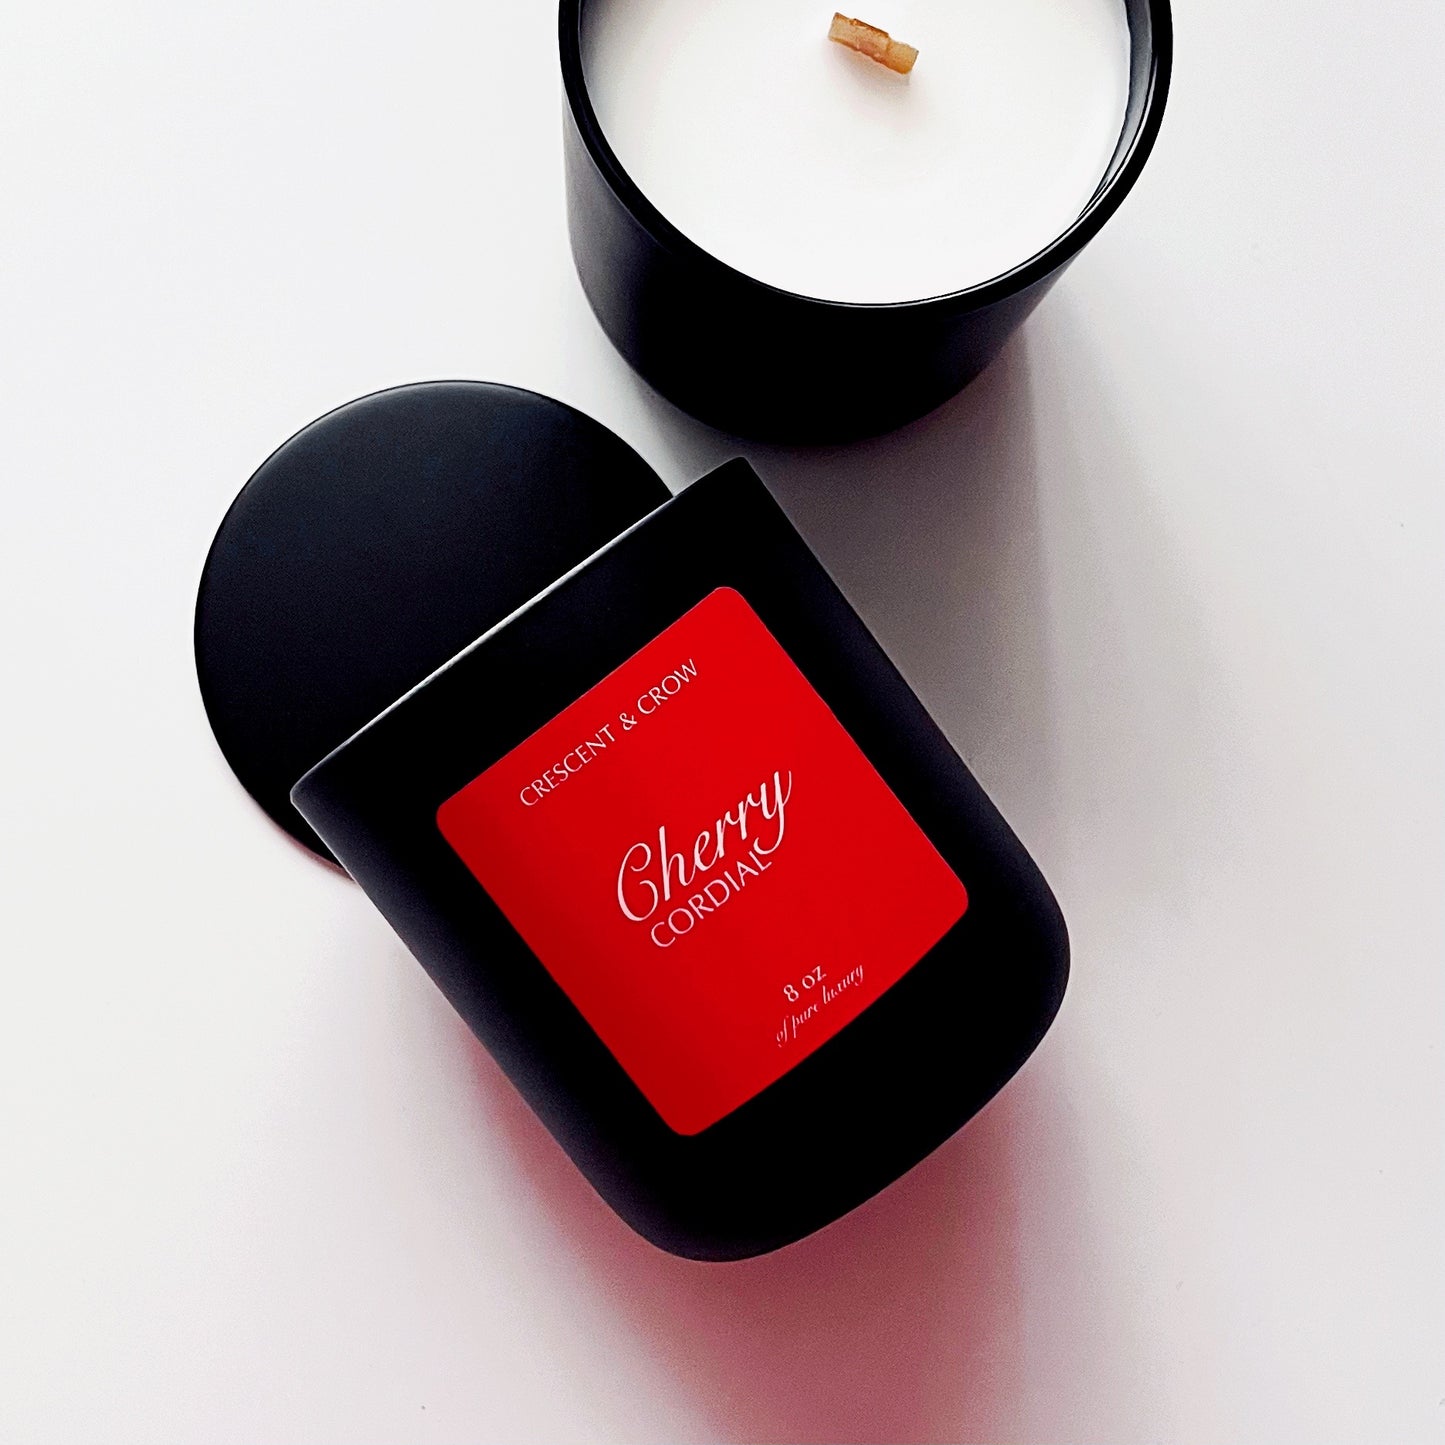 Cherry Cordial Luxury Candle in Brandied Cherry + Spice